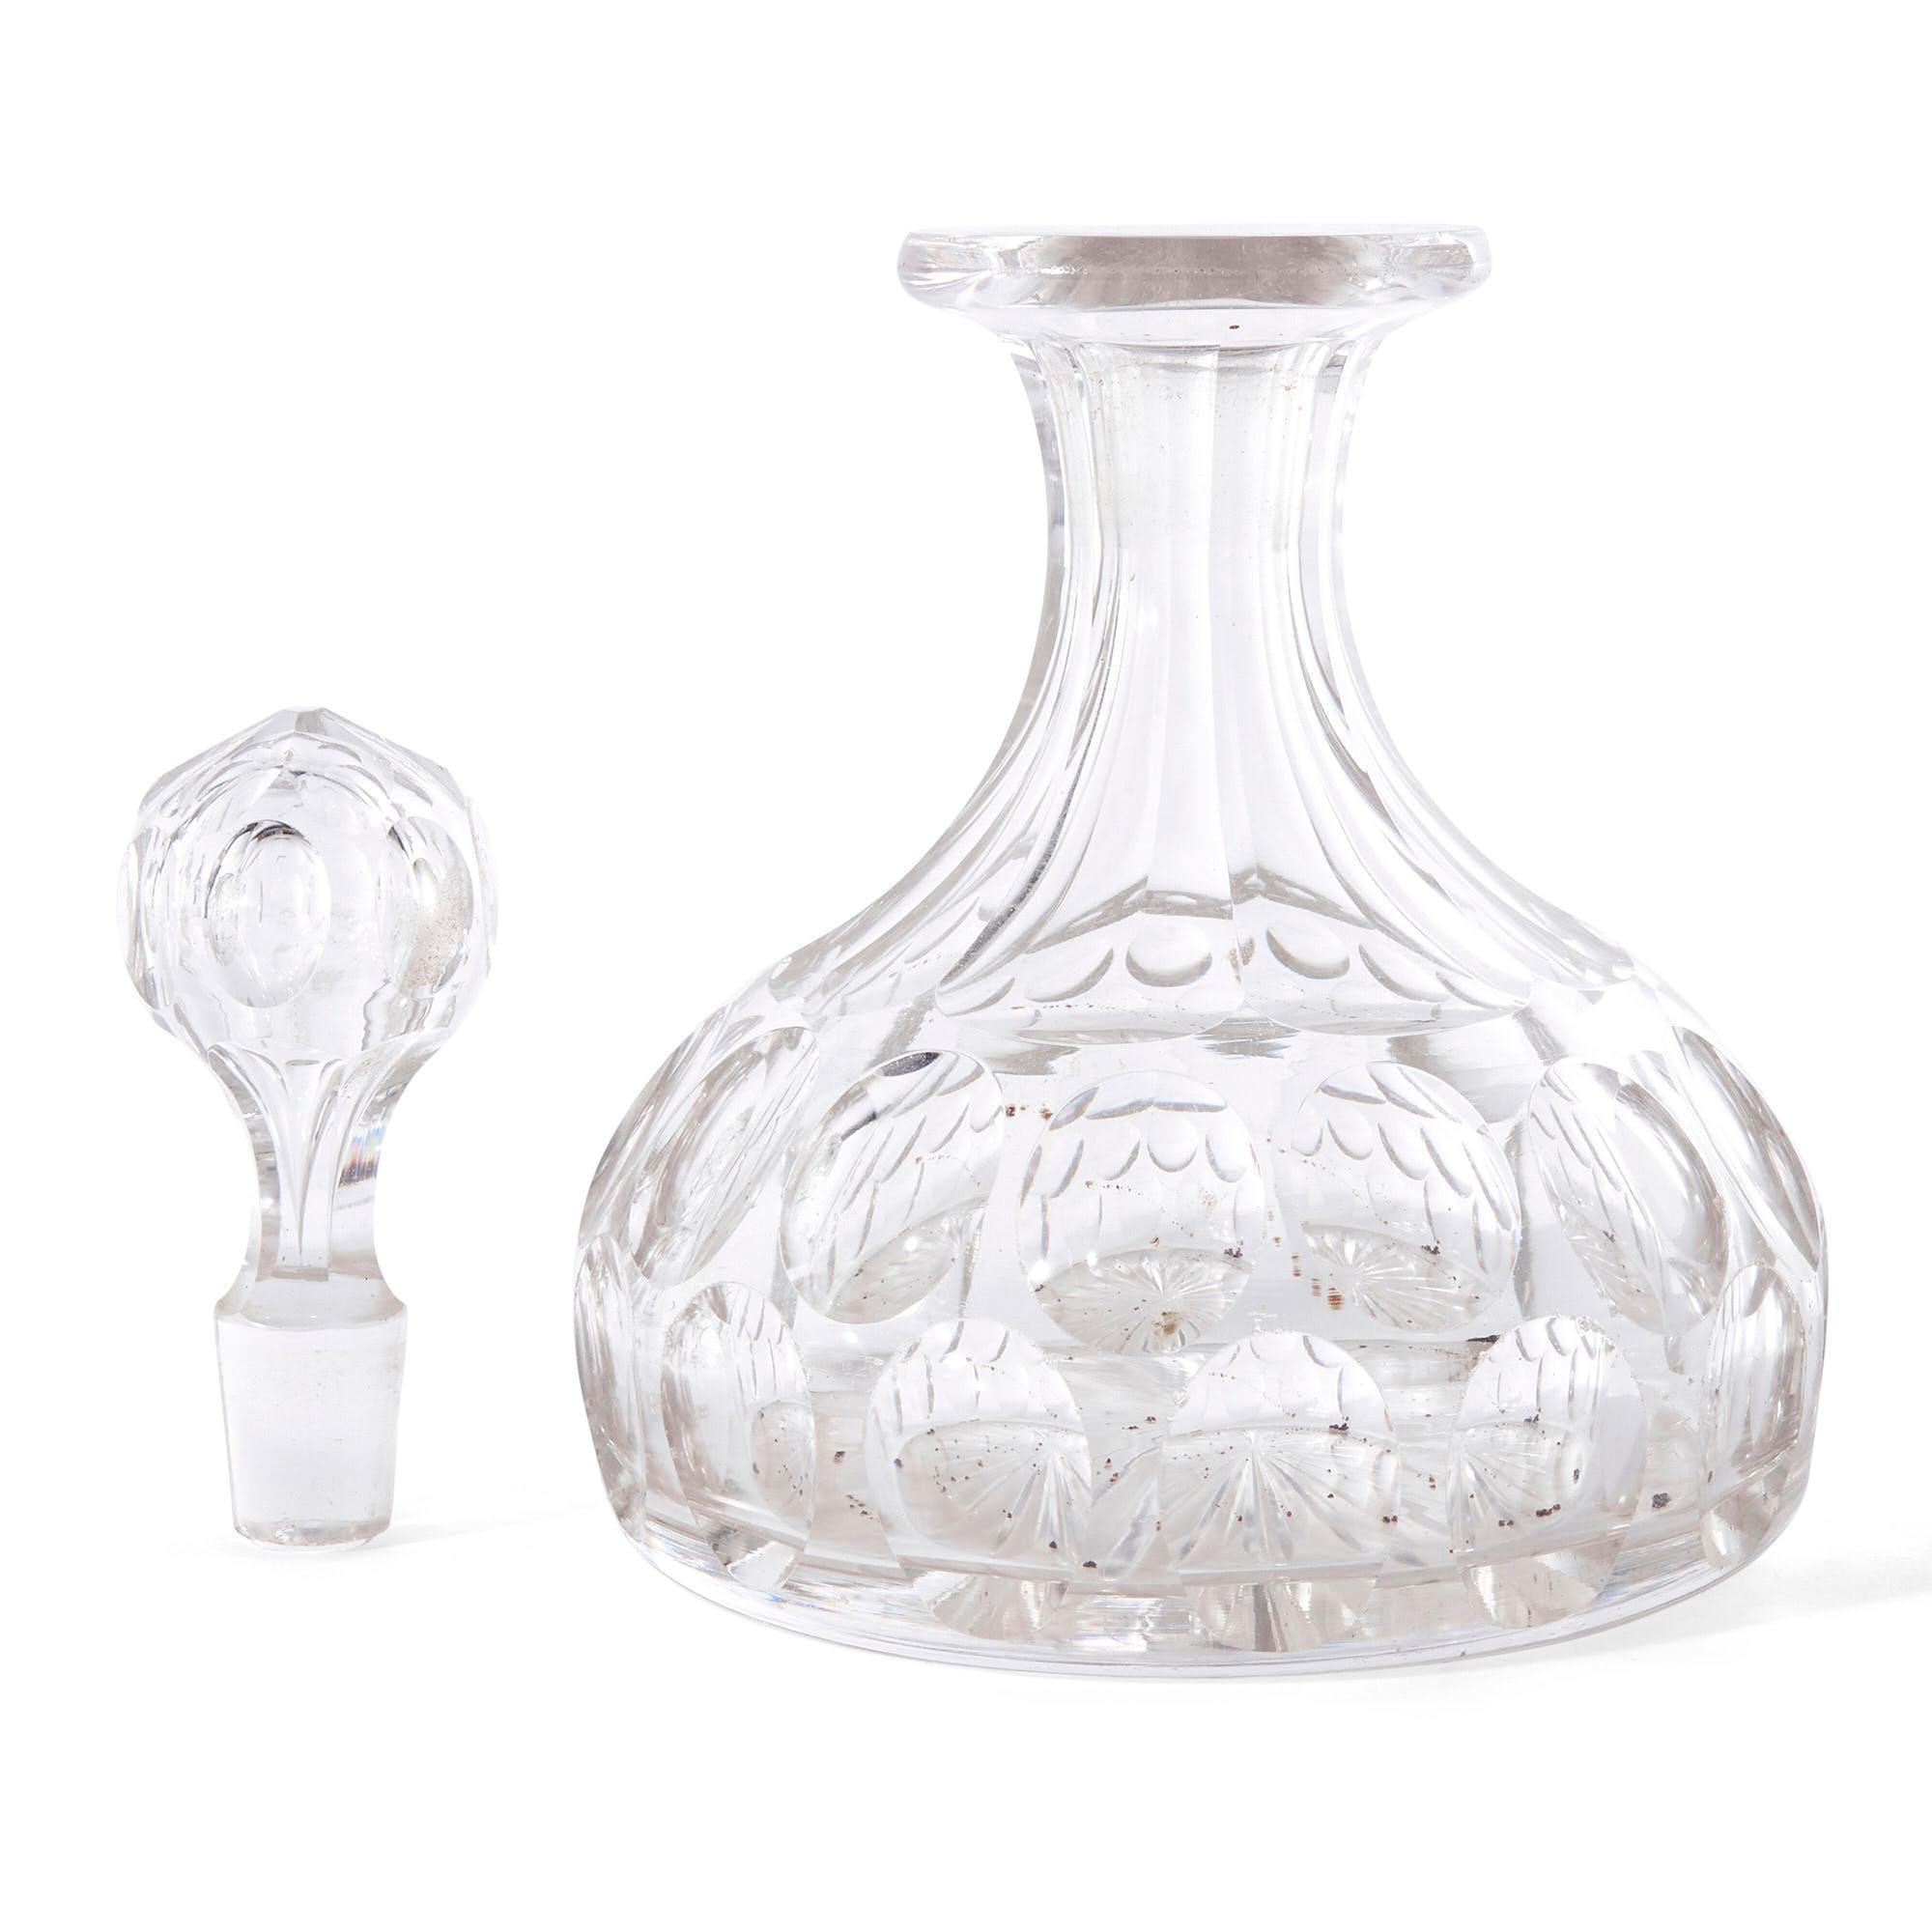 Pair of French Cut Glass Decanters with Six Glasses In Good Condition For Sale In London, GB